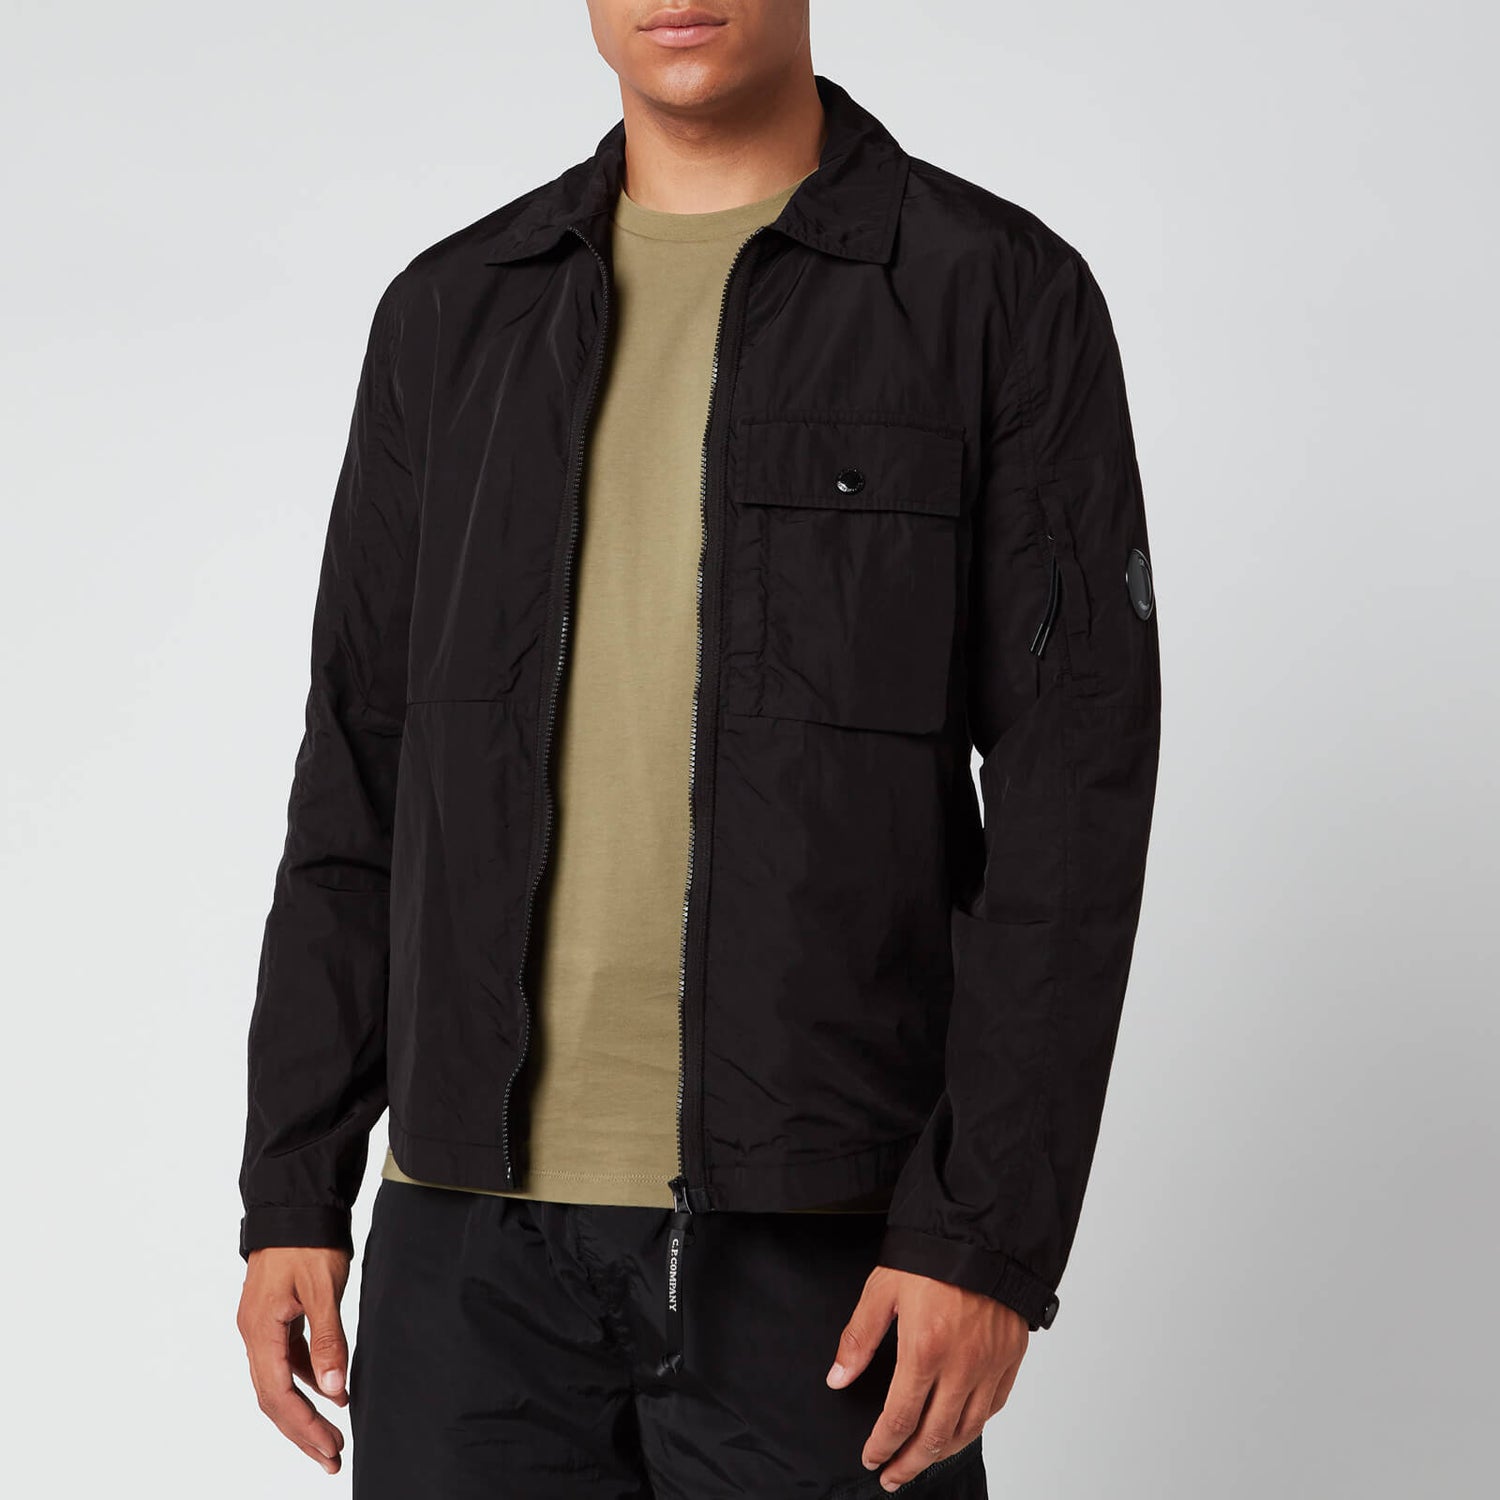 C.P. Company Men's Zip Shirt Jacket - Black - Free UK Delivery Available